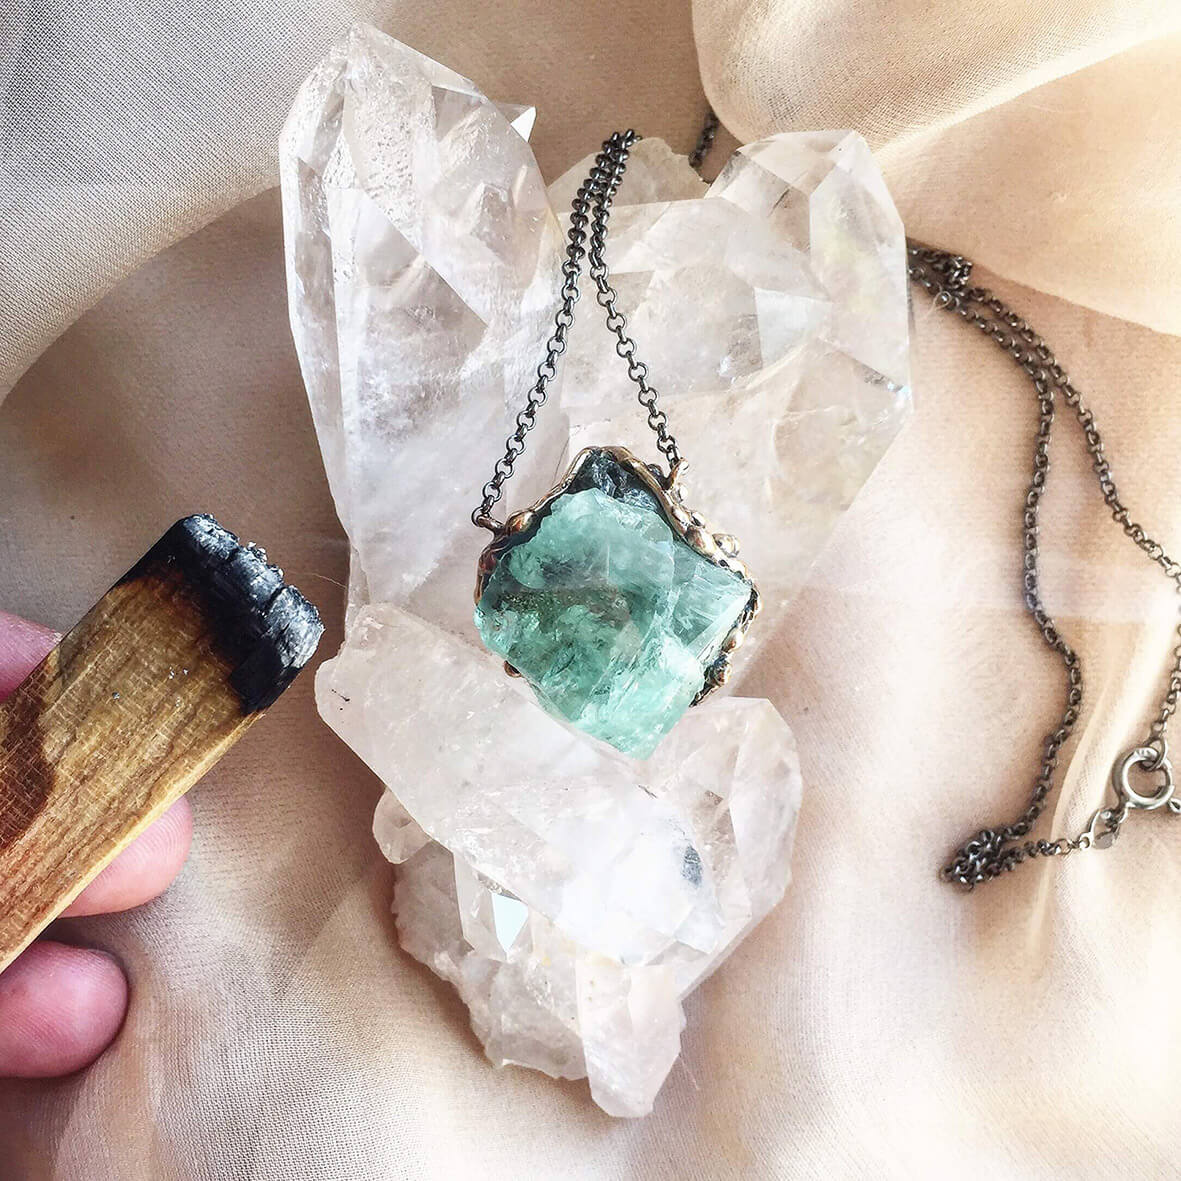 smudge is one of the most powerful ways to cleanse crystals